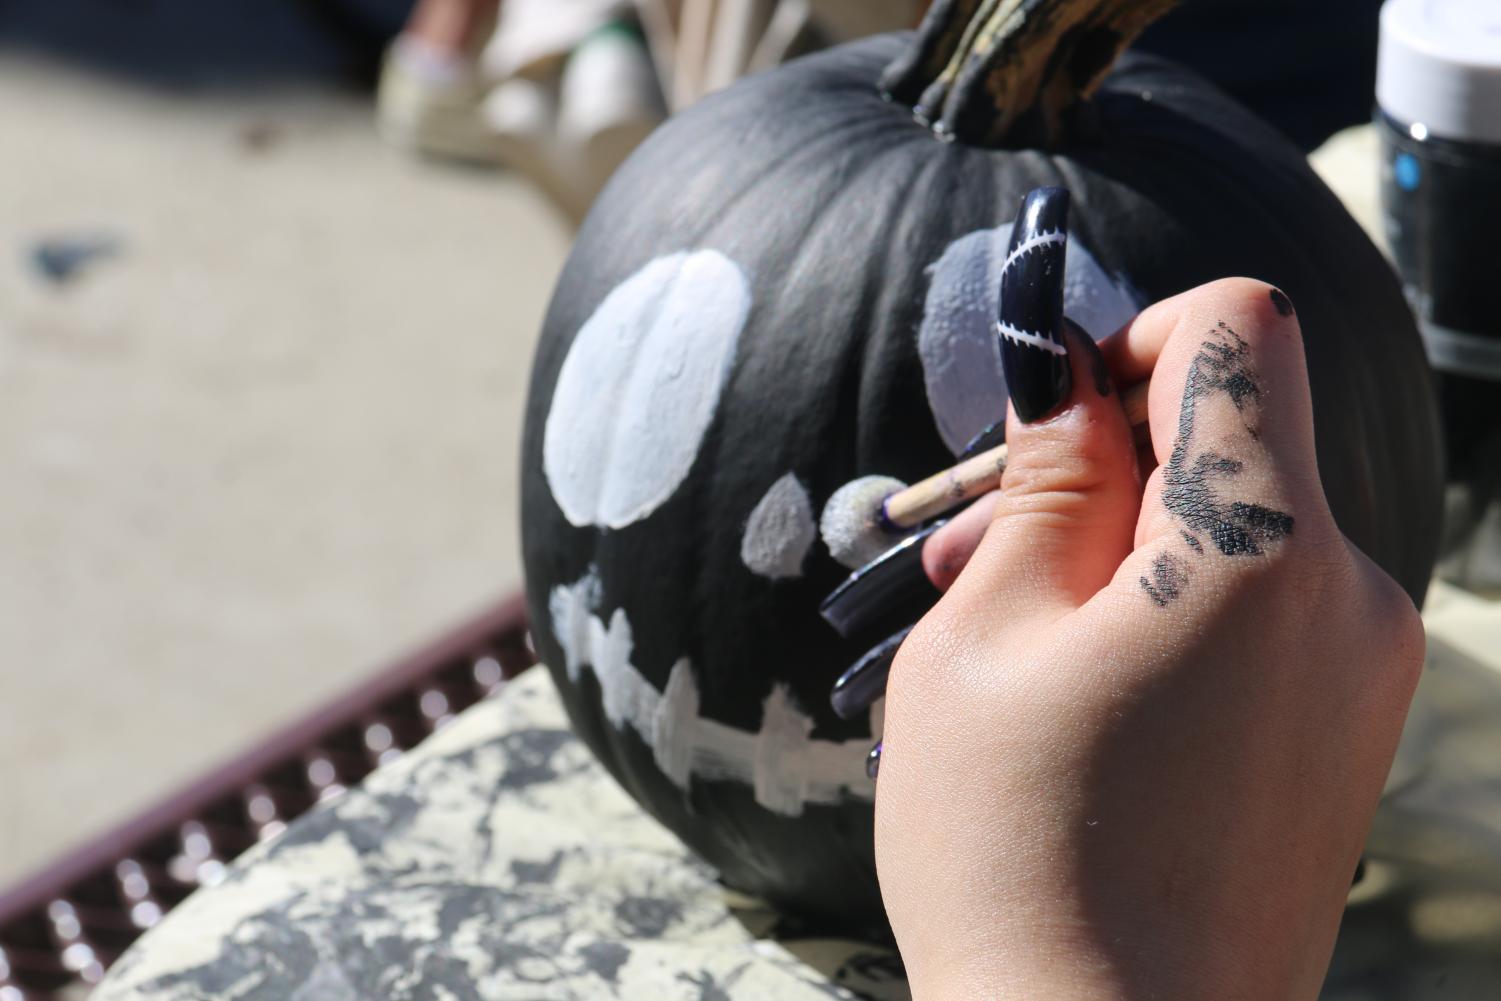 English+second+language+students+participate+in+a+pumpkin+painting+social